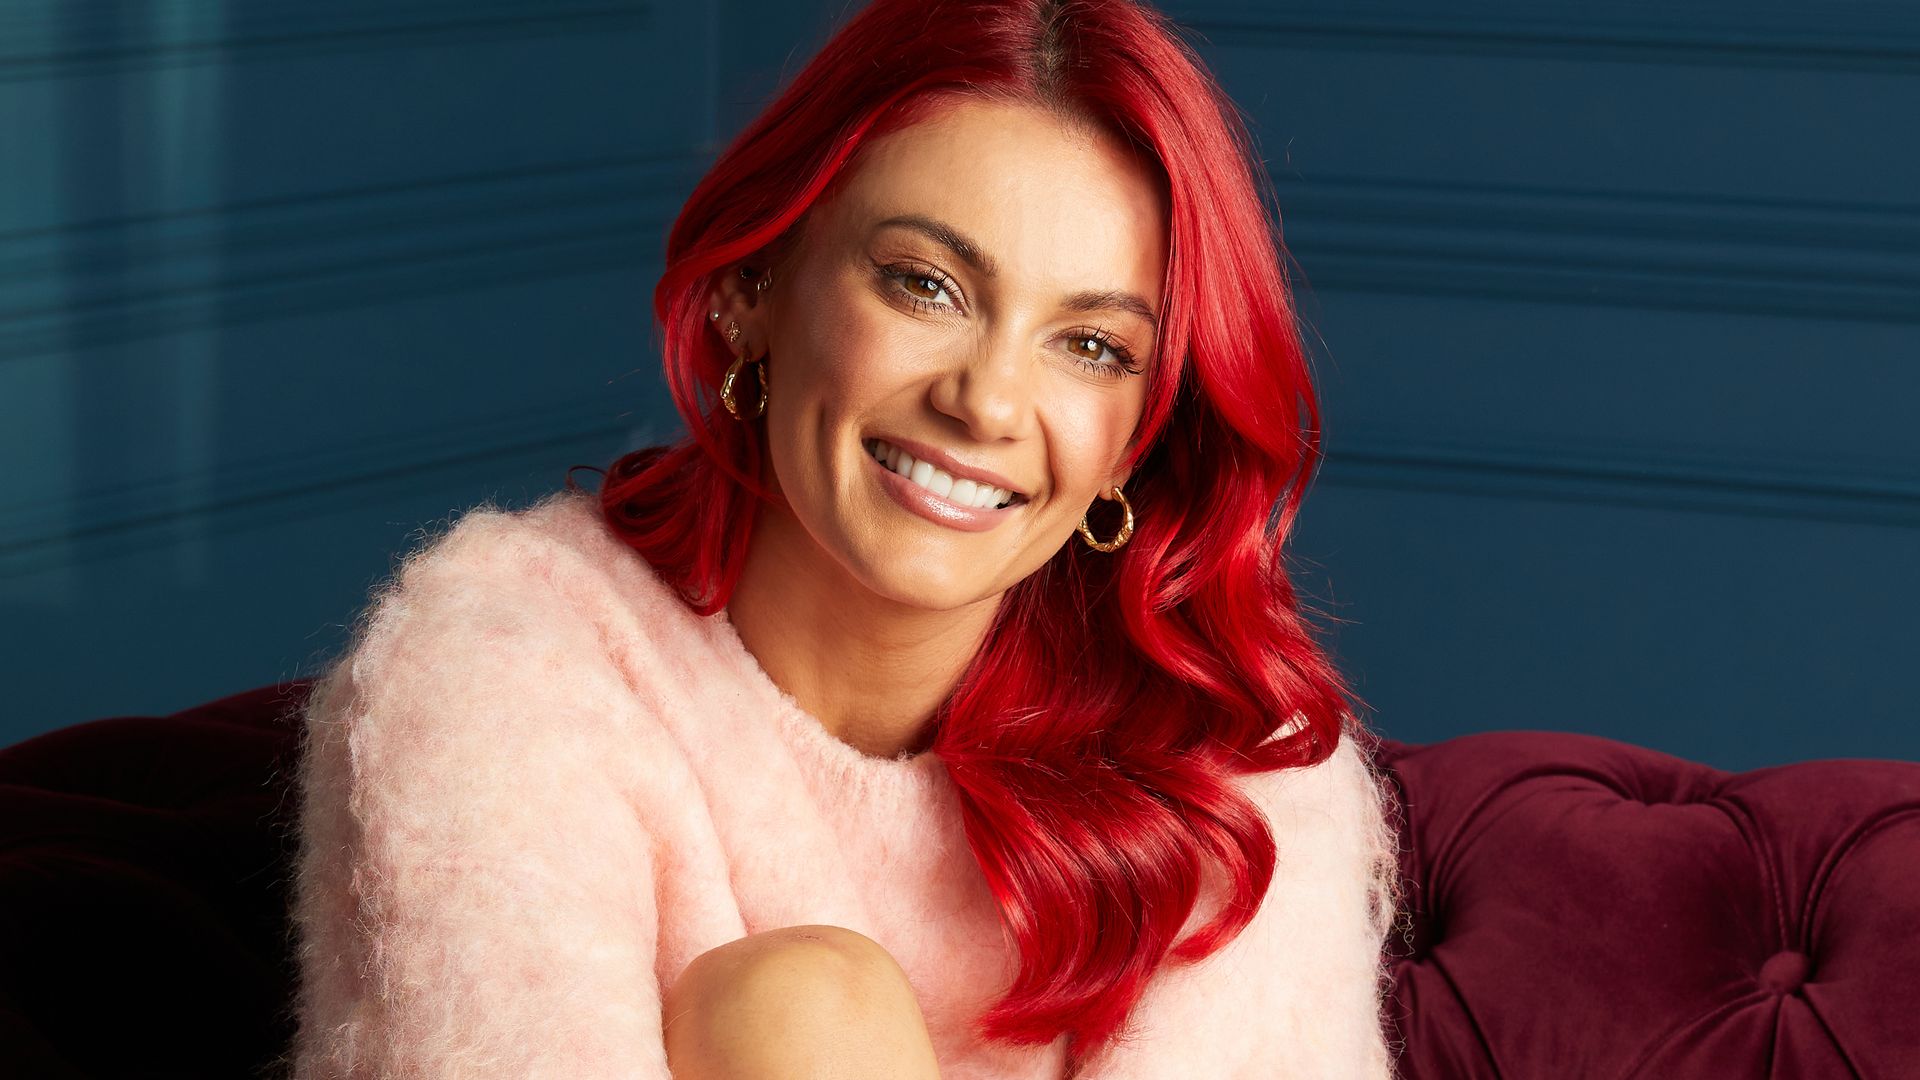 Exclusive: Dianne Buswell opens up about how she's 'changed' Joe and their future at £3.5 million home